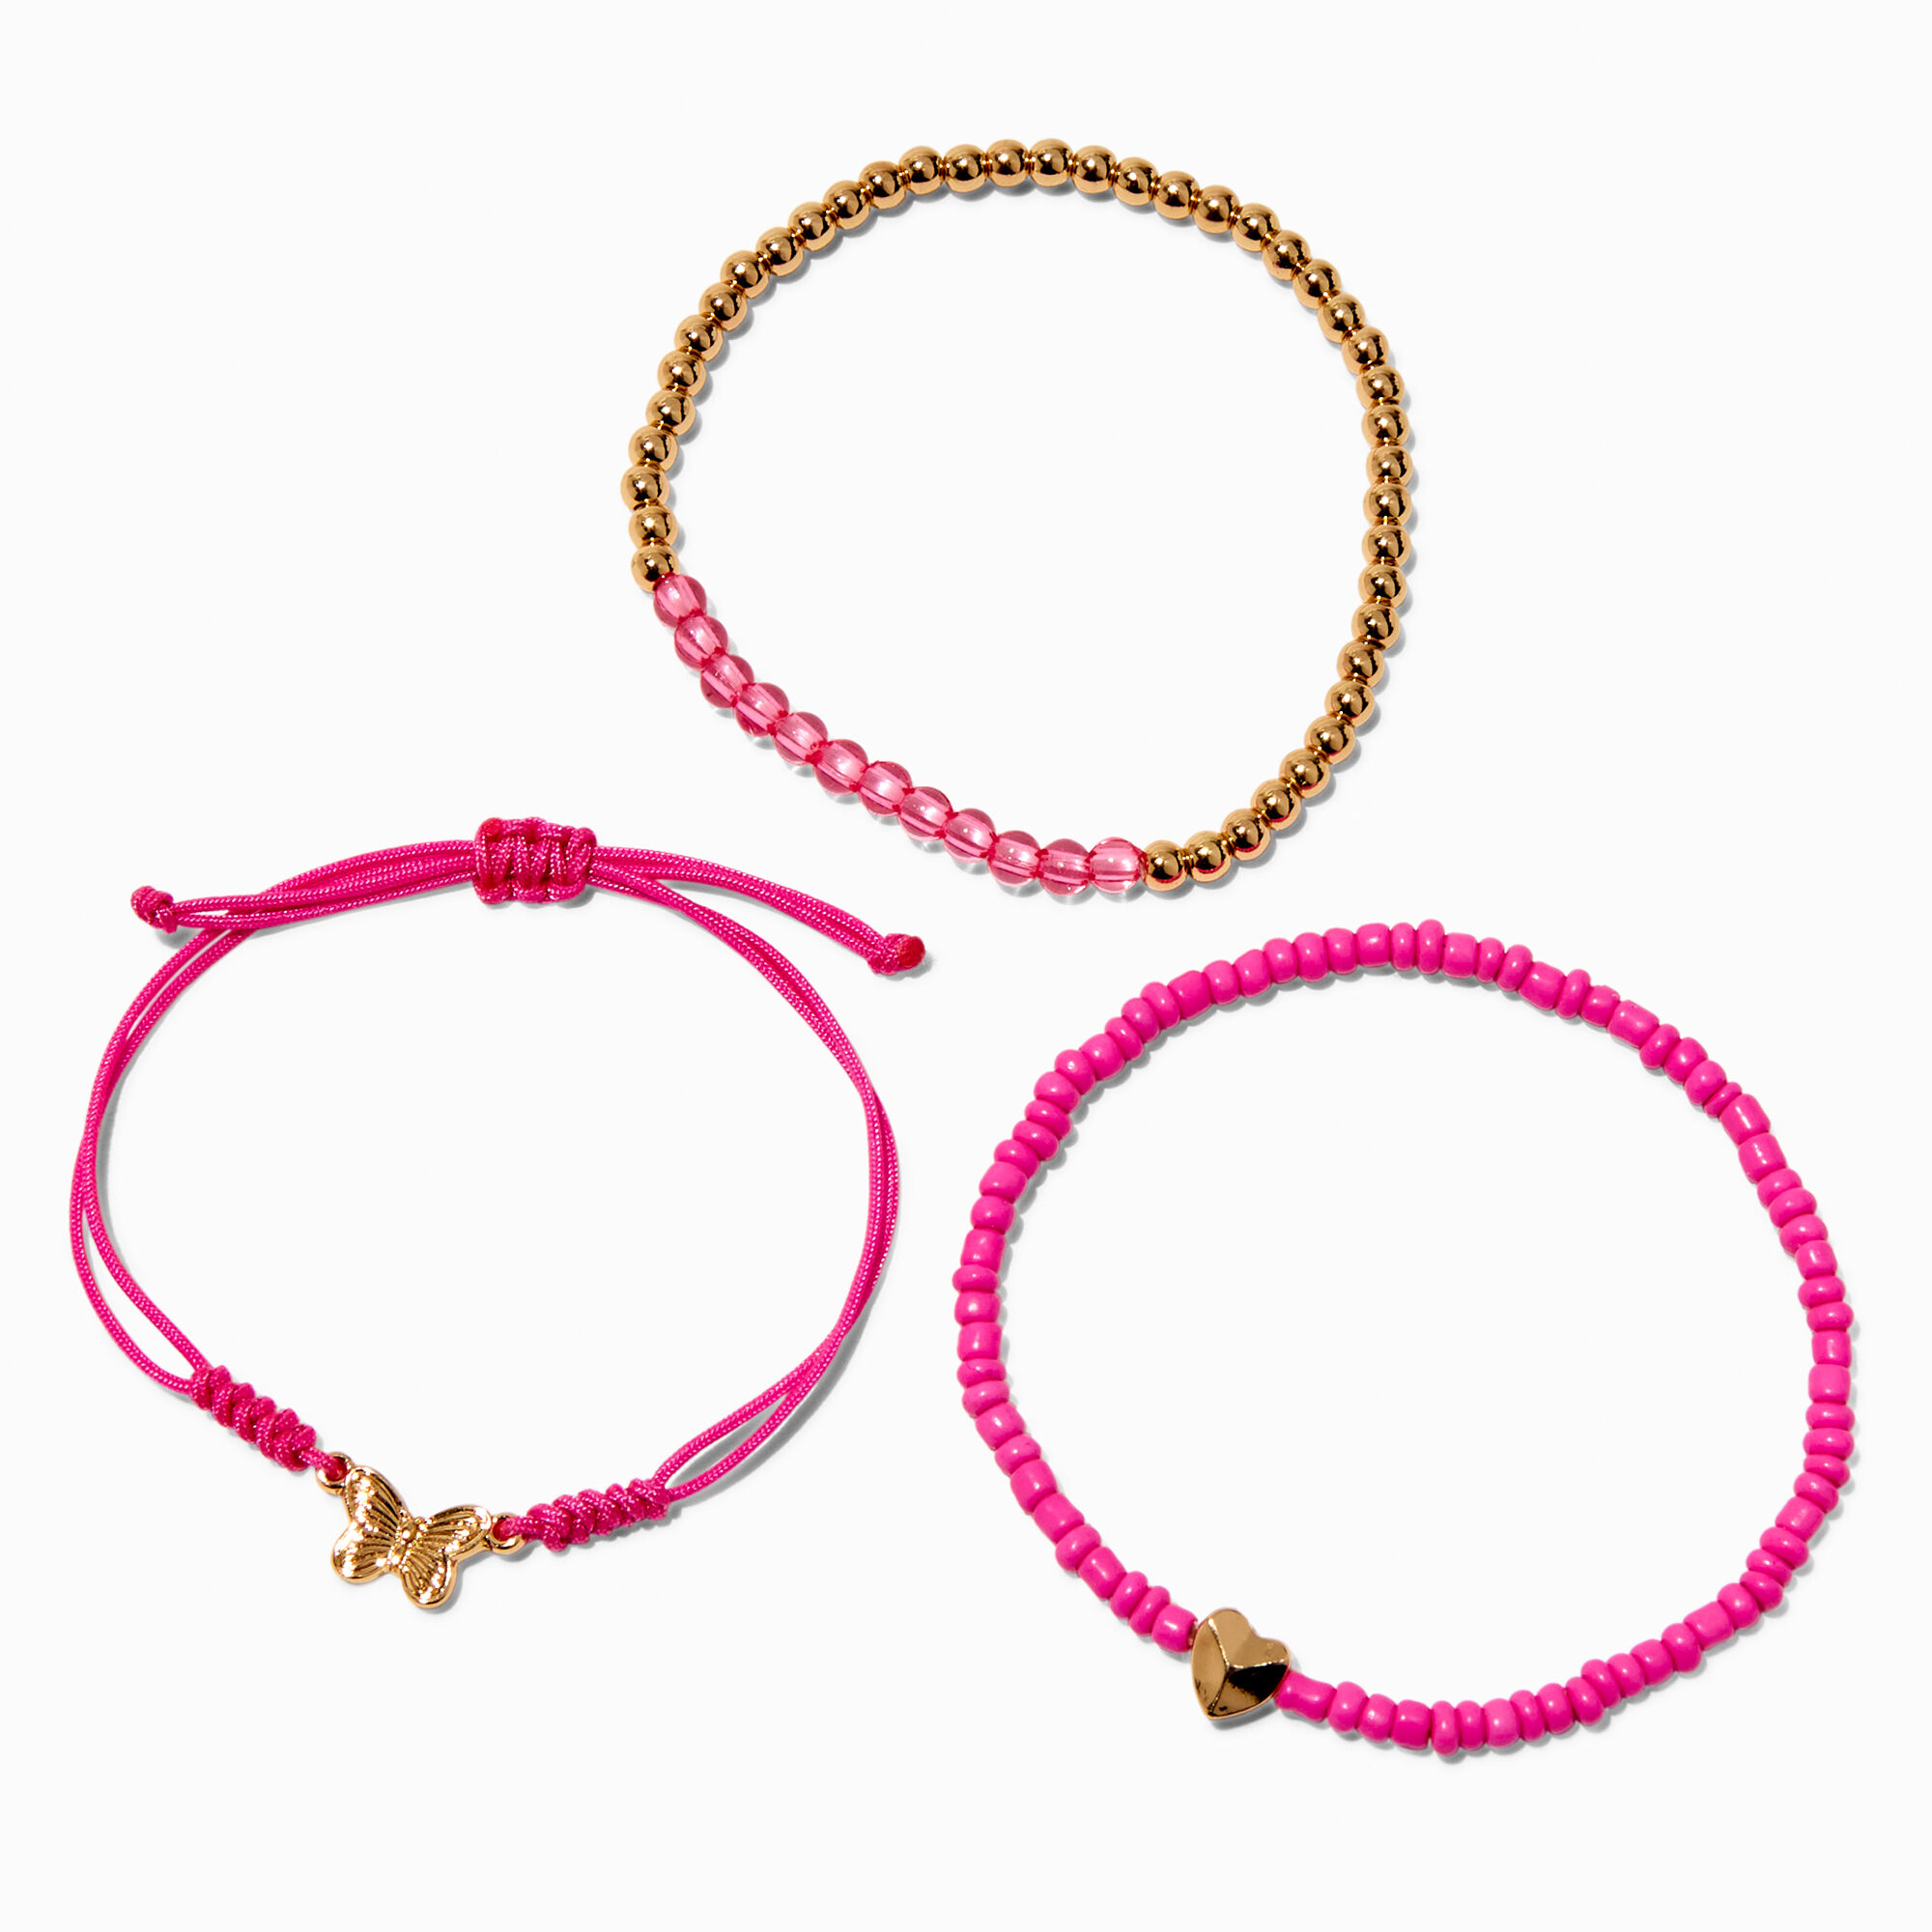 View Claires Butterfly Heart Beaded Bracelet Set 3 Pack Fuchsia information